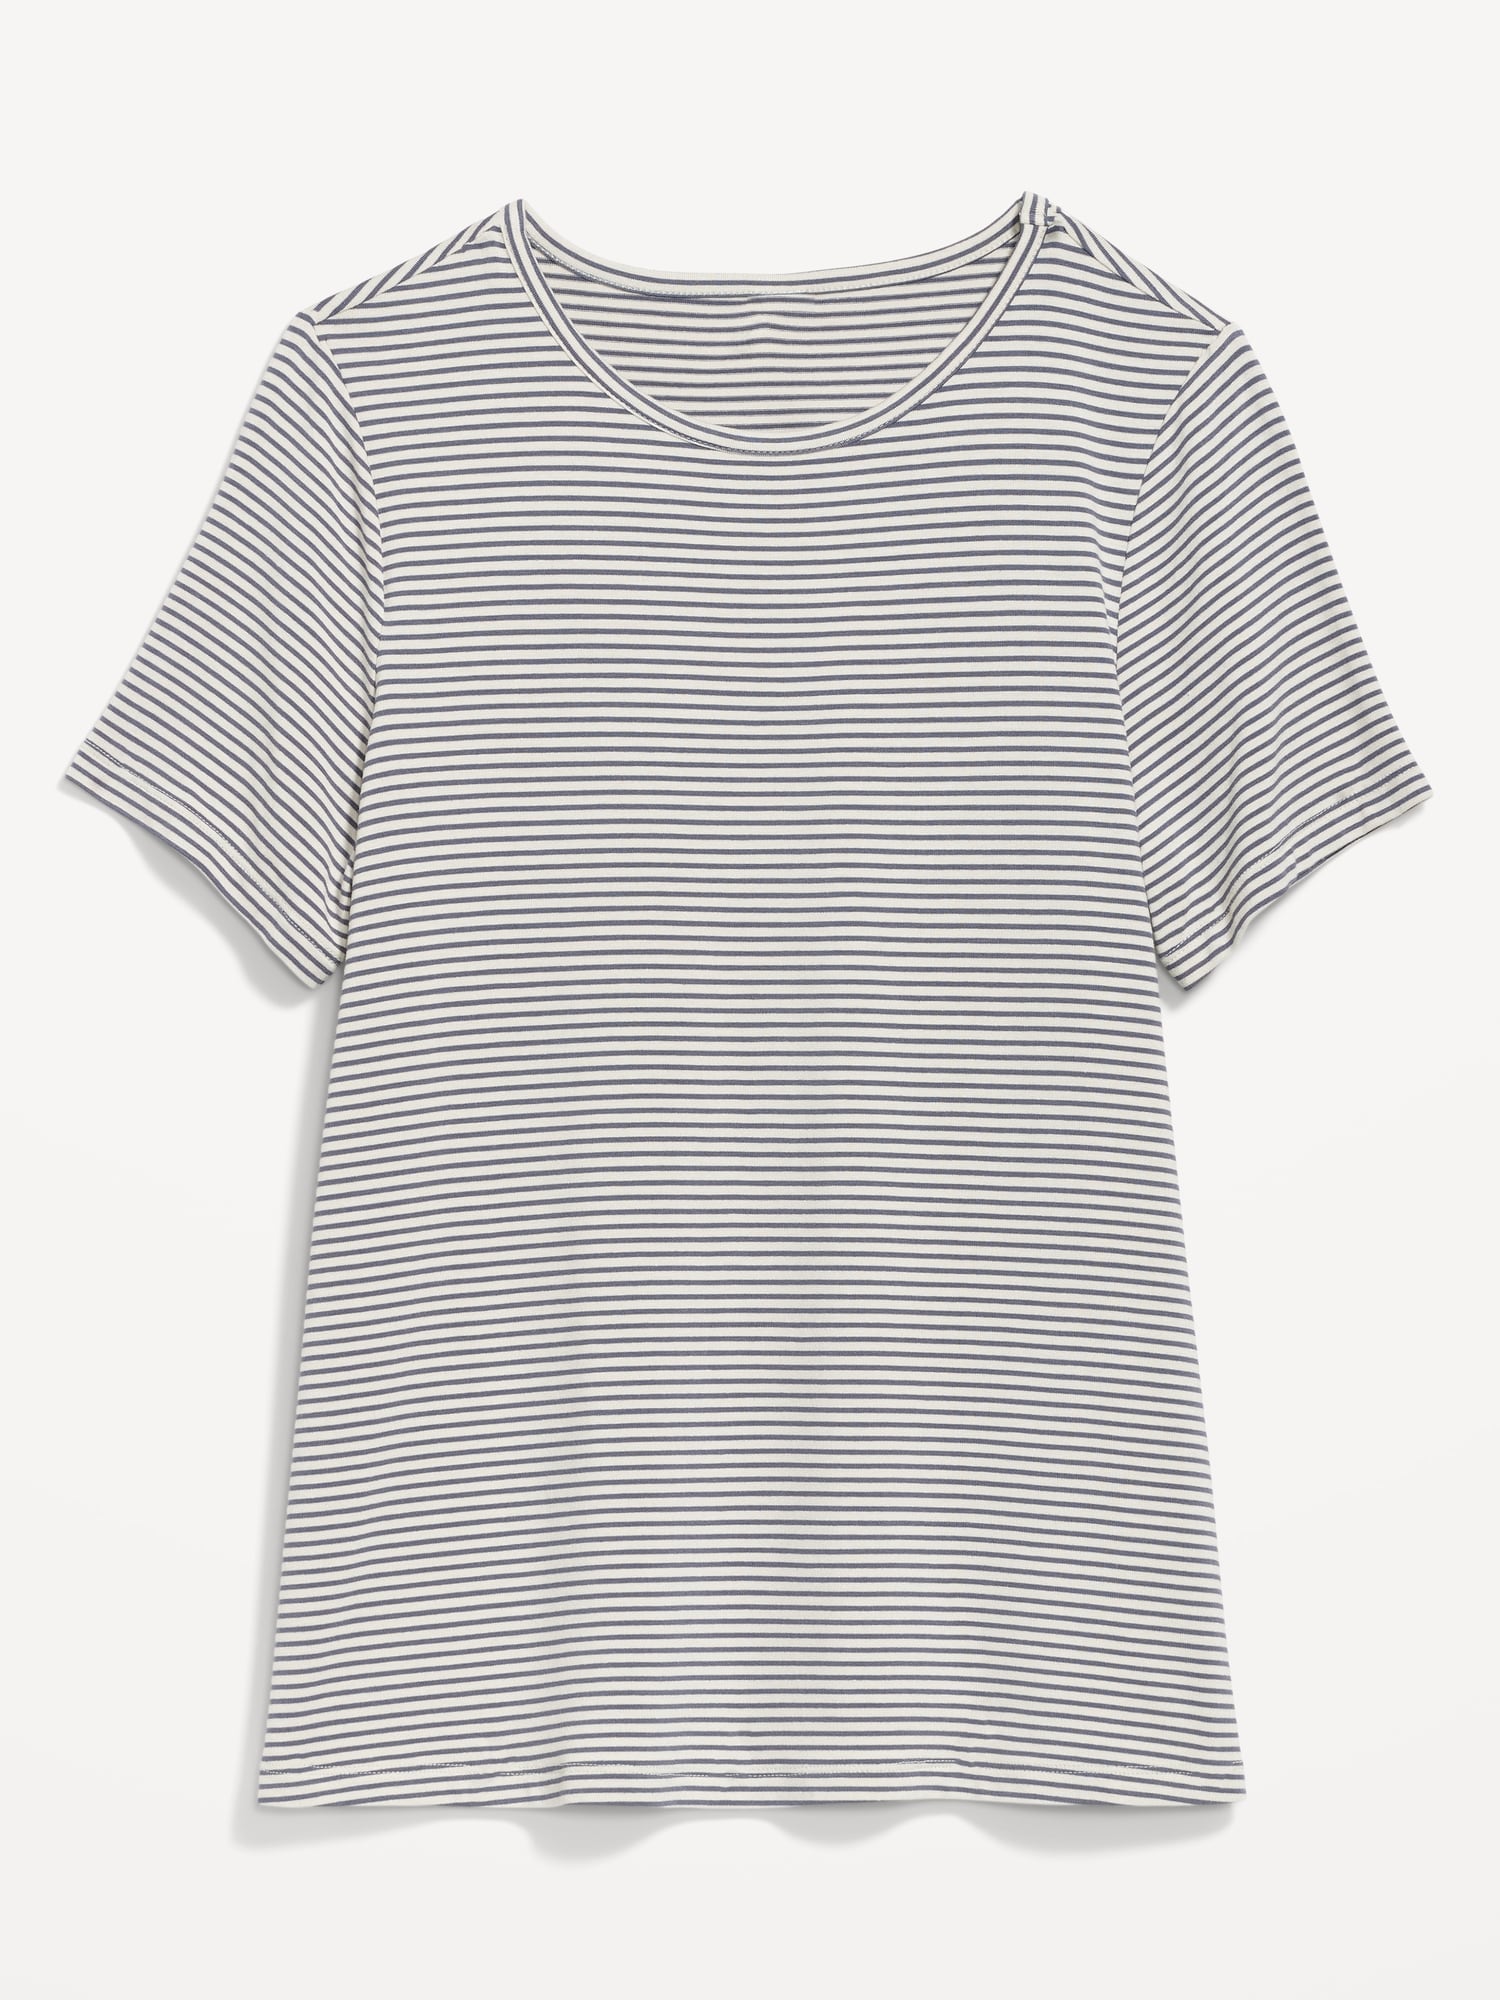 for Women Navy Old Striped T-Shirt Luxe |